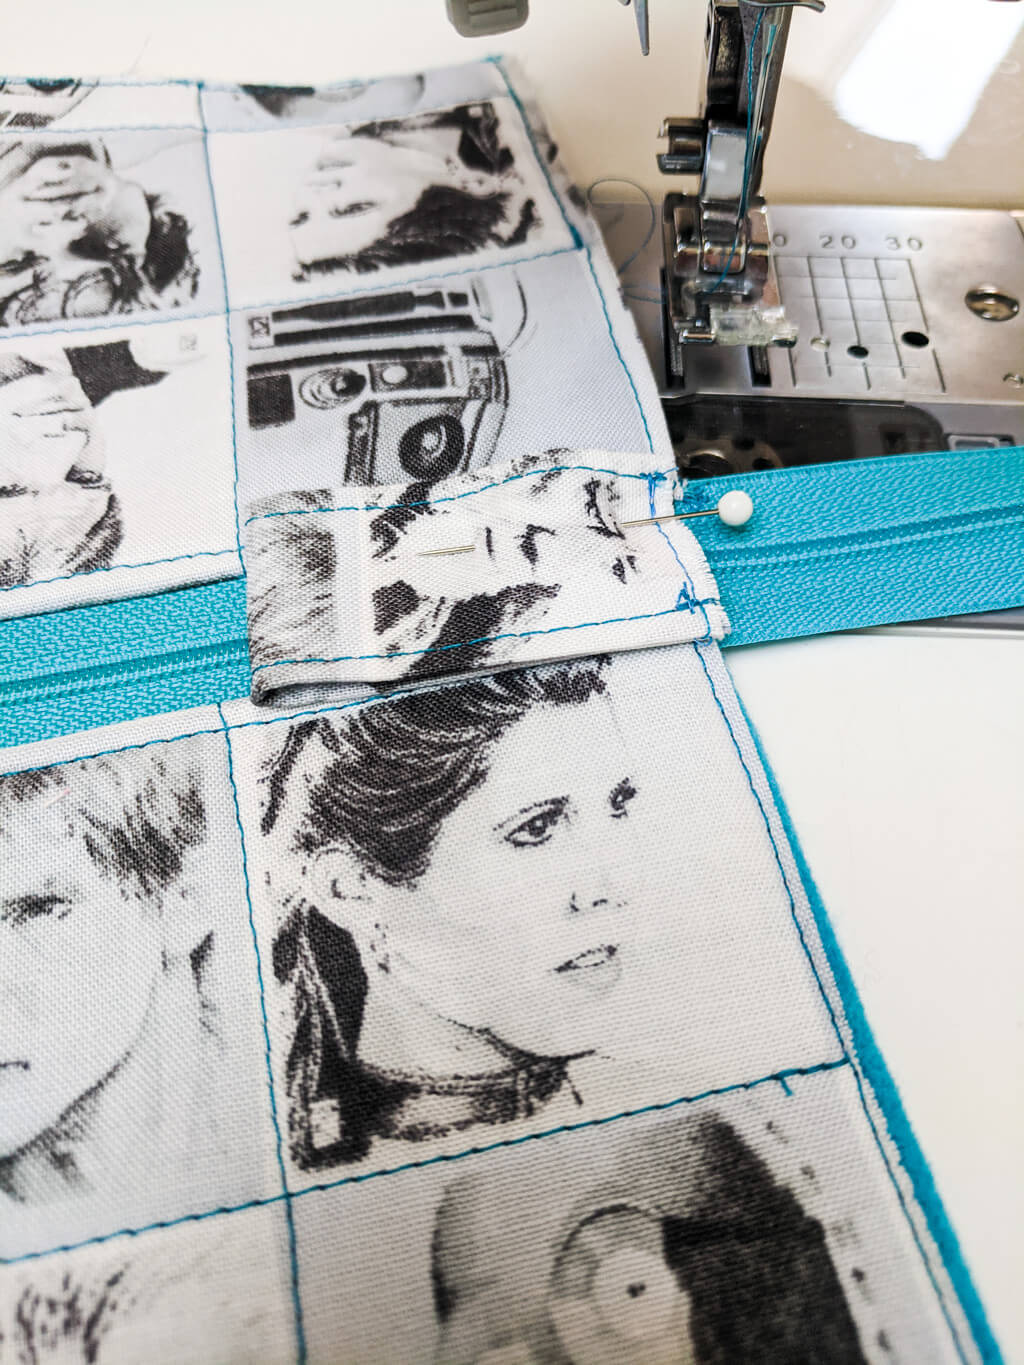 How to sew a pull tab onto a zipper pouch